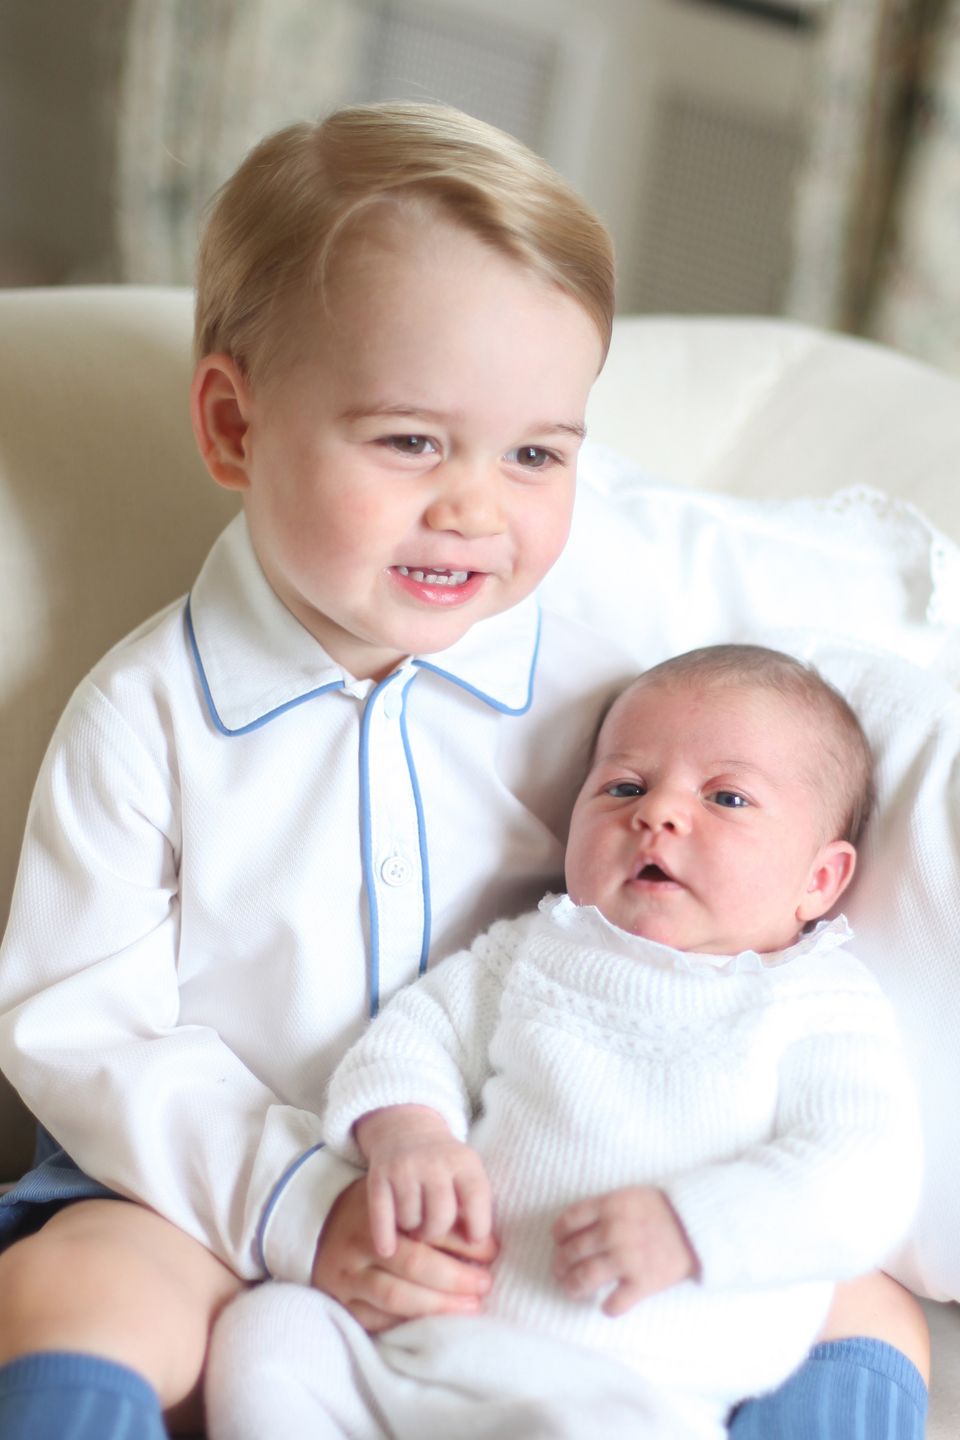 Prince George & Princess Charlotte Of Cambridge - Official Photographs Released